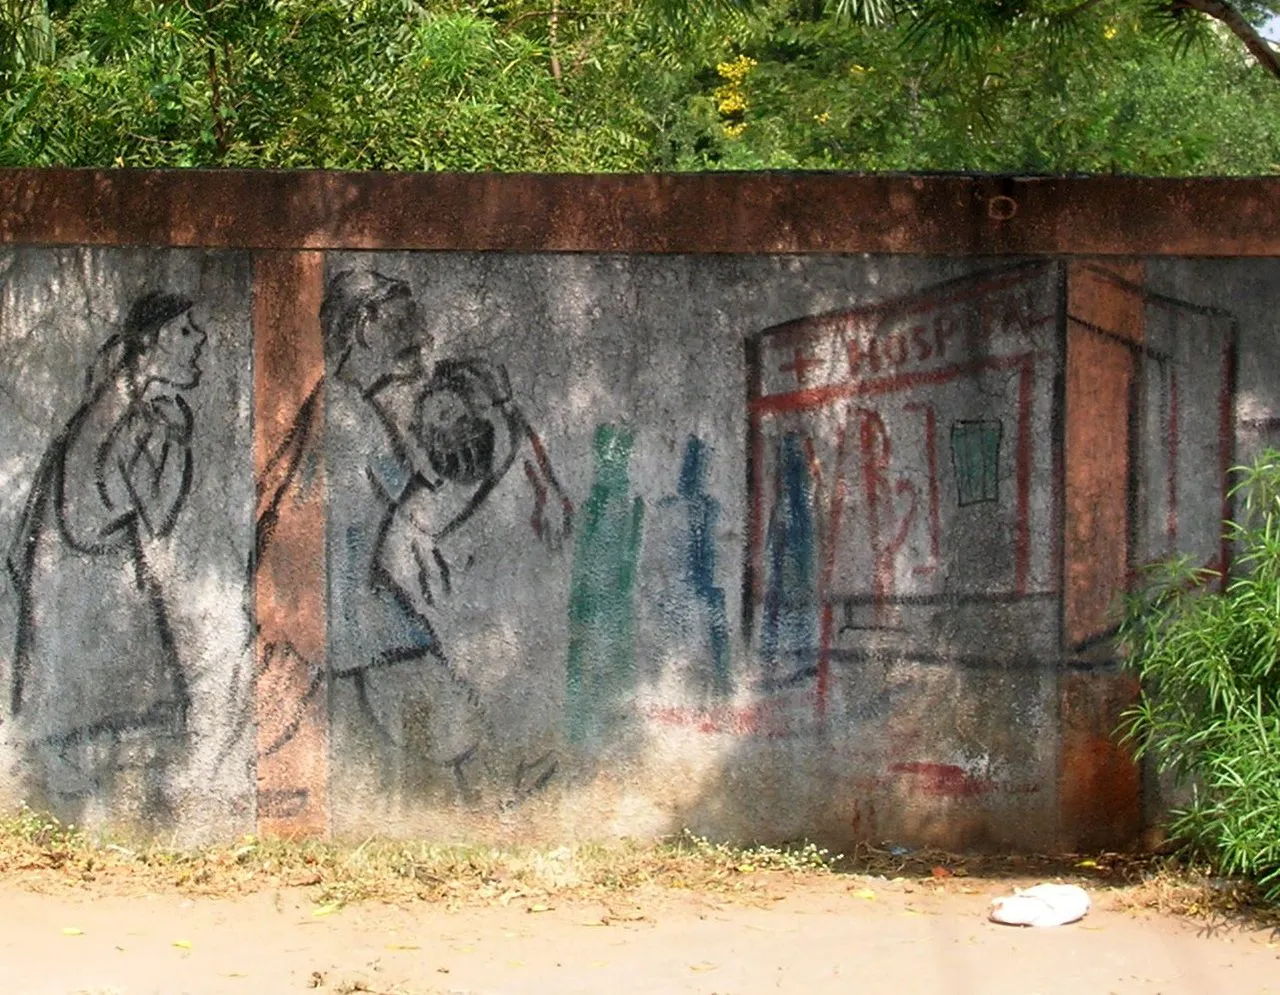 mural, street art, Union Carbide, Bhopal, hospital, figures, silhouette, emergency, medical services, wall painting